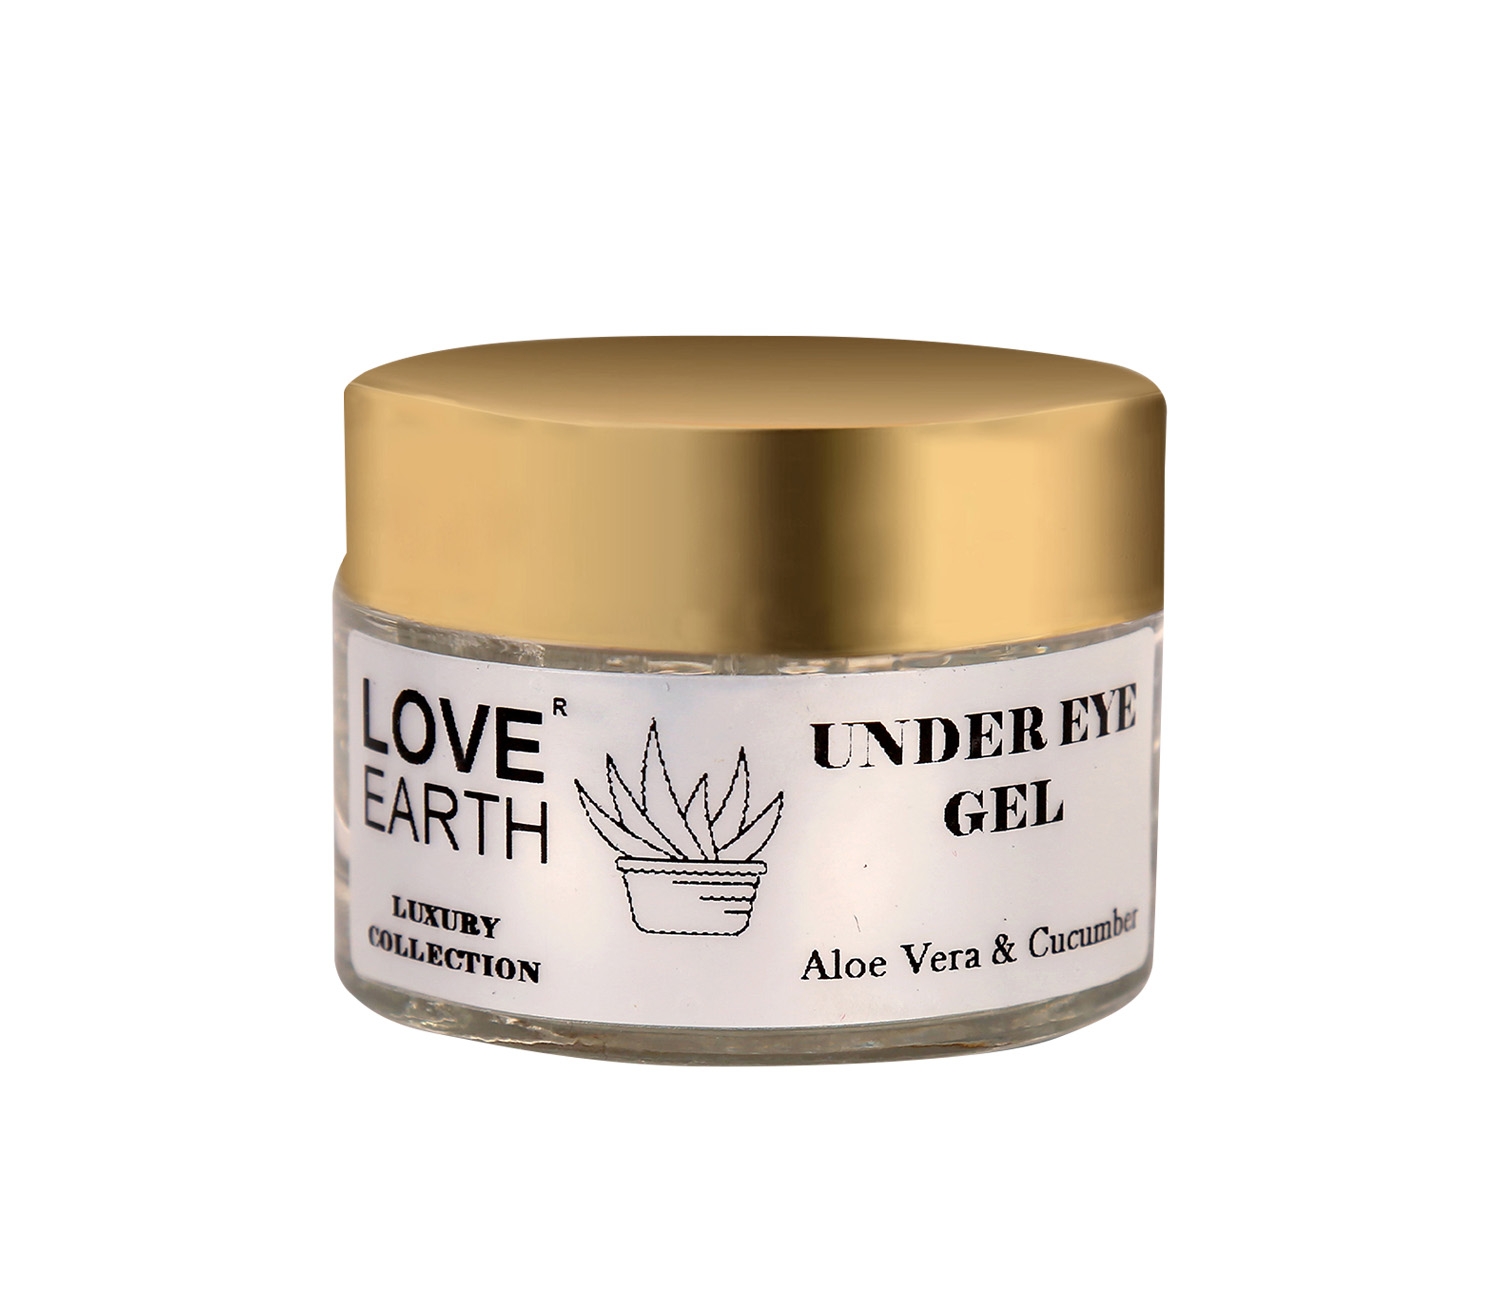 LOVE EARTH | Love Earth Organic Under Eye Gel with Aloe Vera & Cucumber Extracts Reduces Dark Circles, Puffiness and Fine Lines 50gm 0